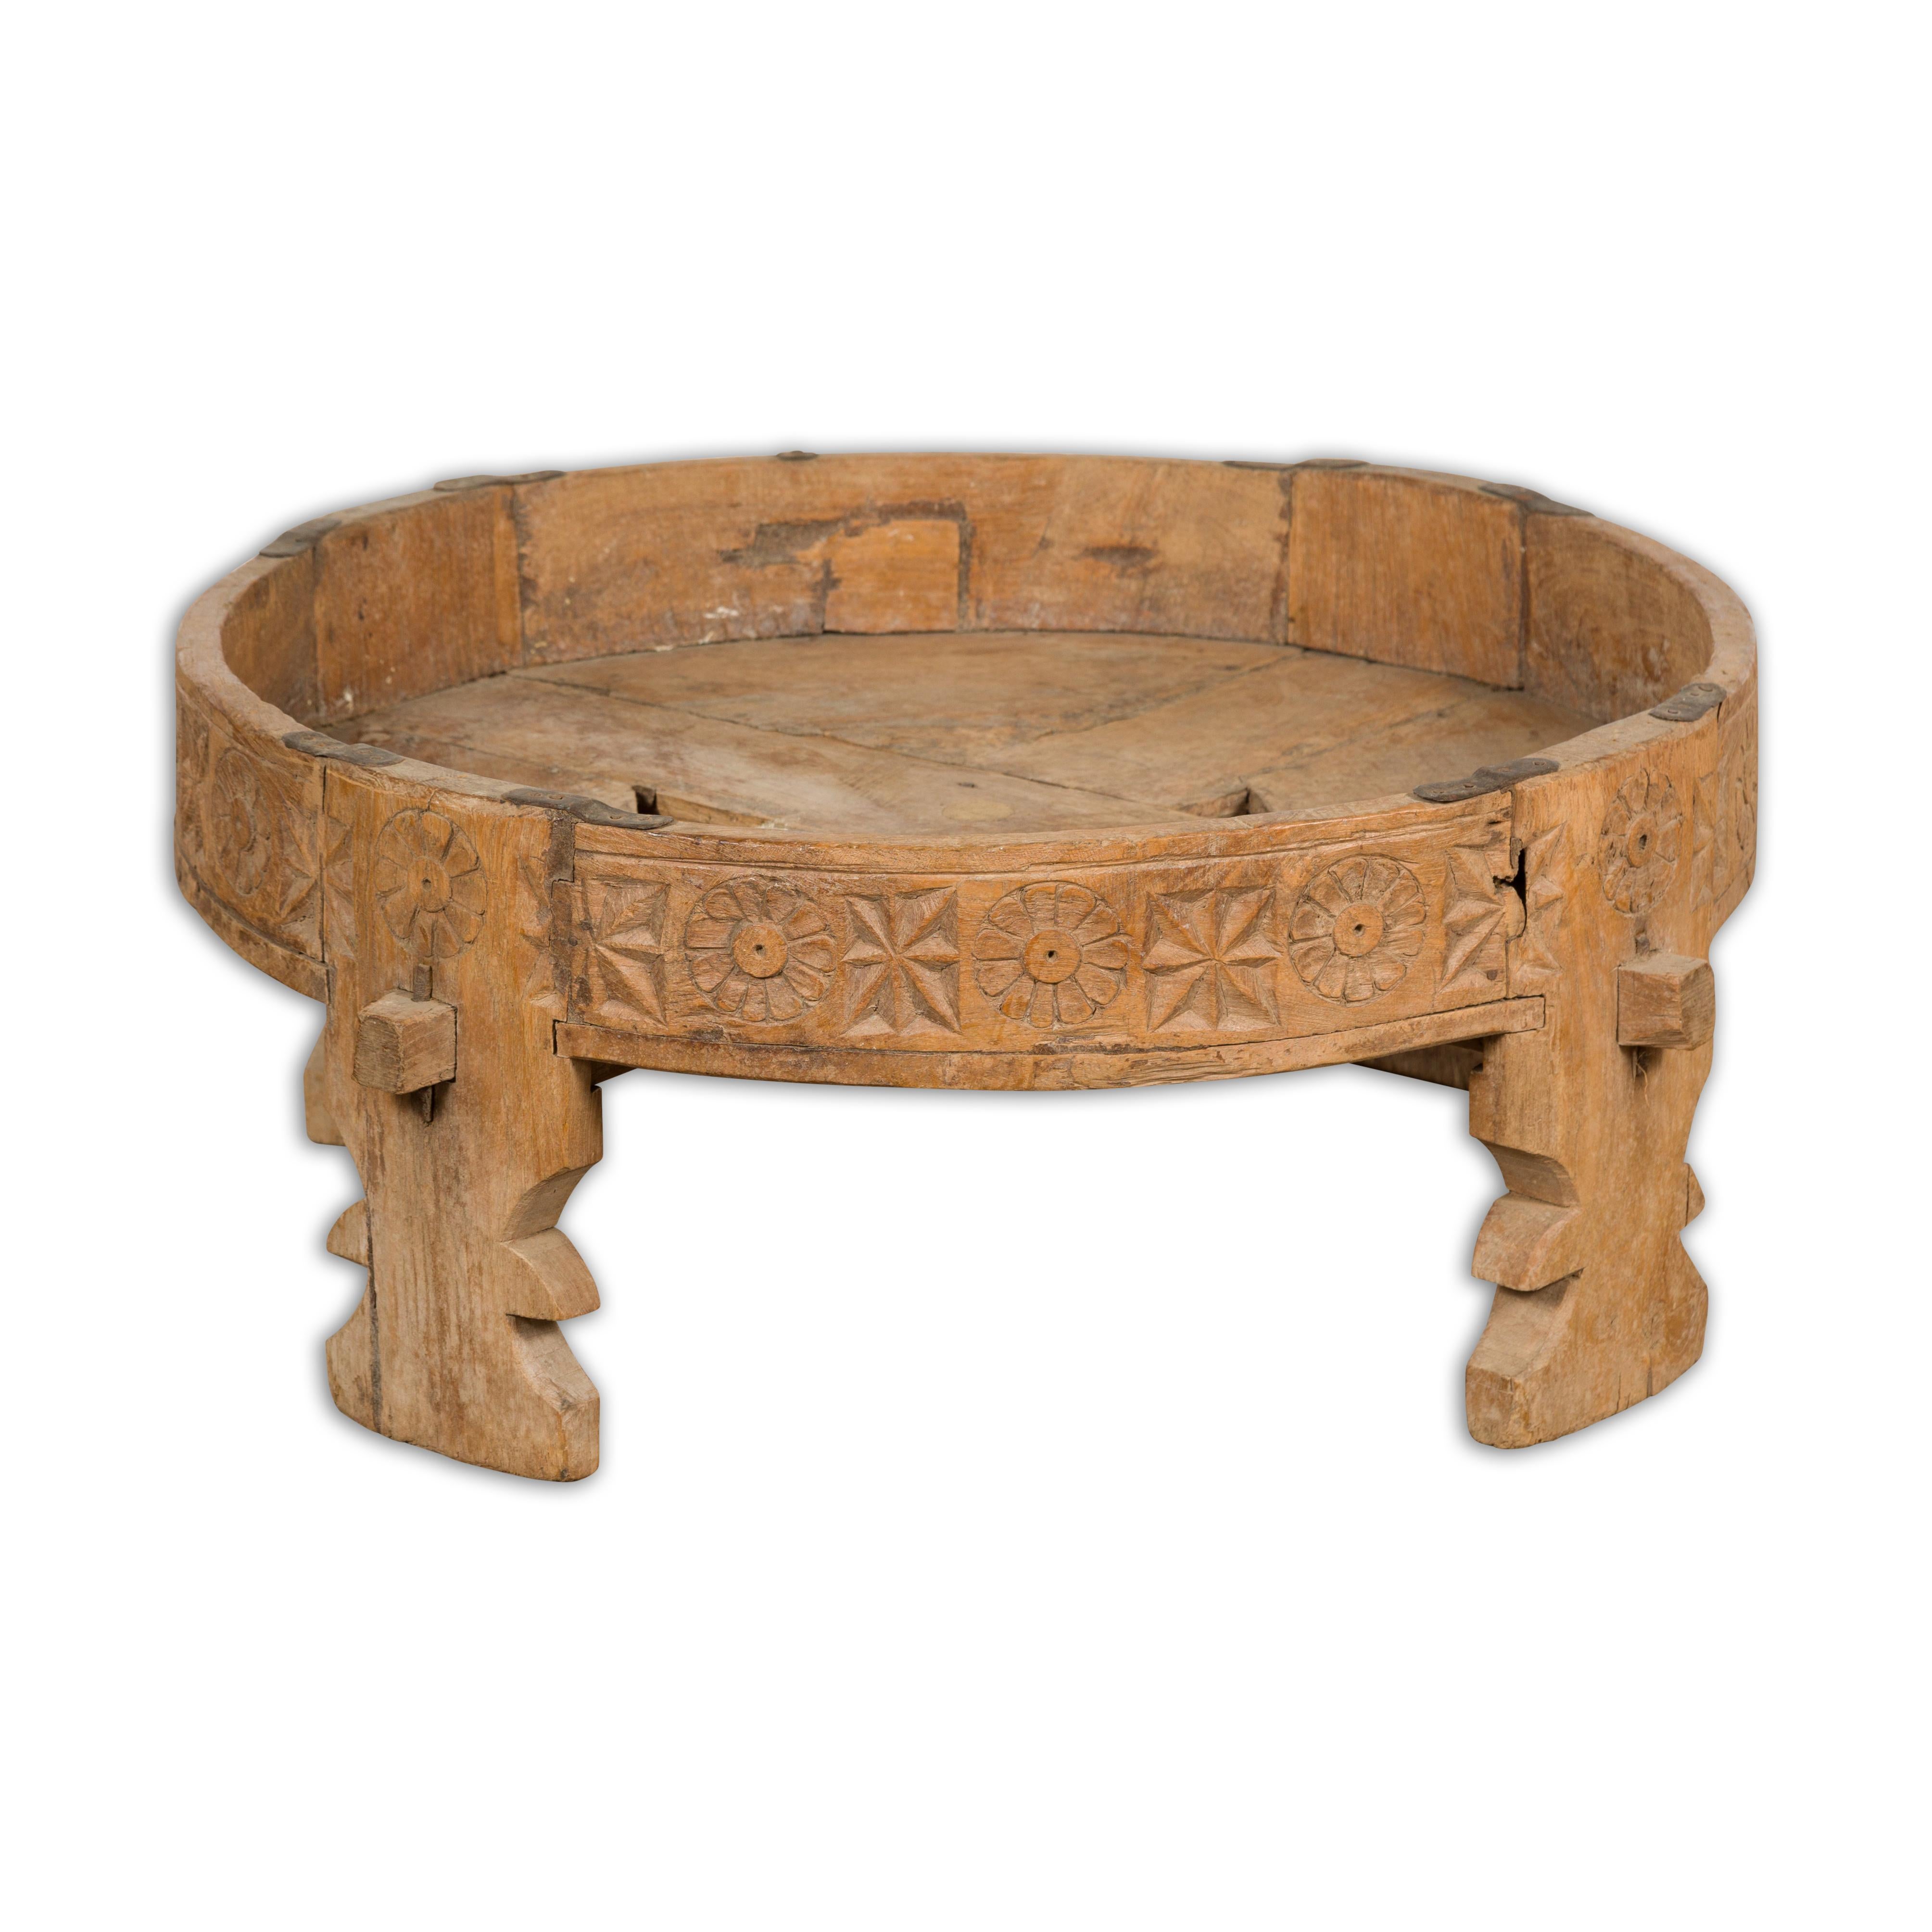 Indian 1920s Teak Chakki Grinding Table with Hand-Carved Geometric Décor For Sale 8